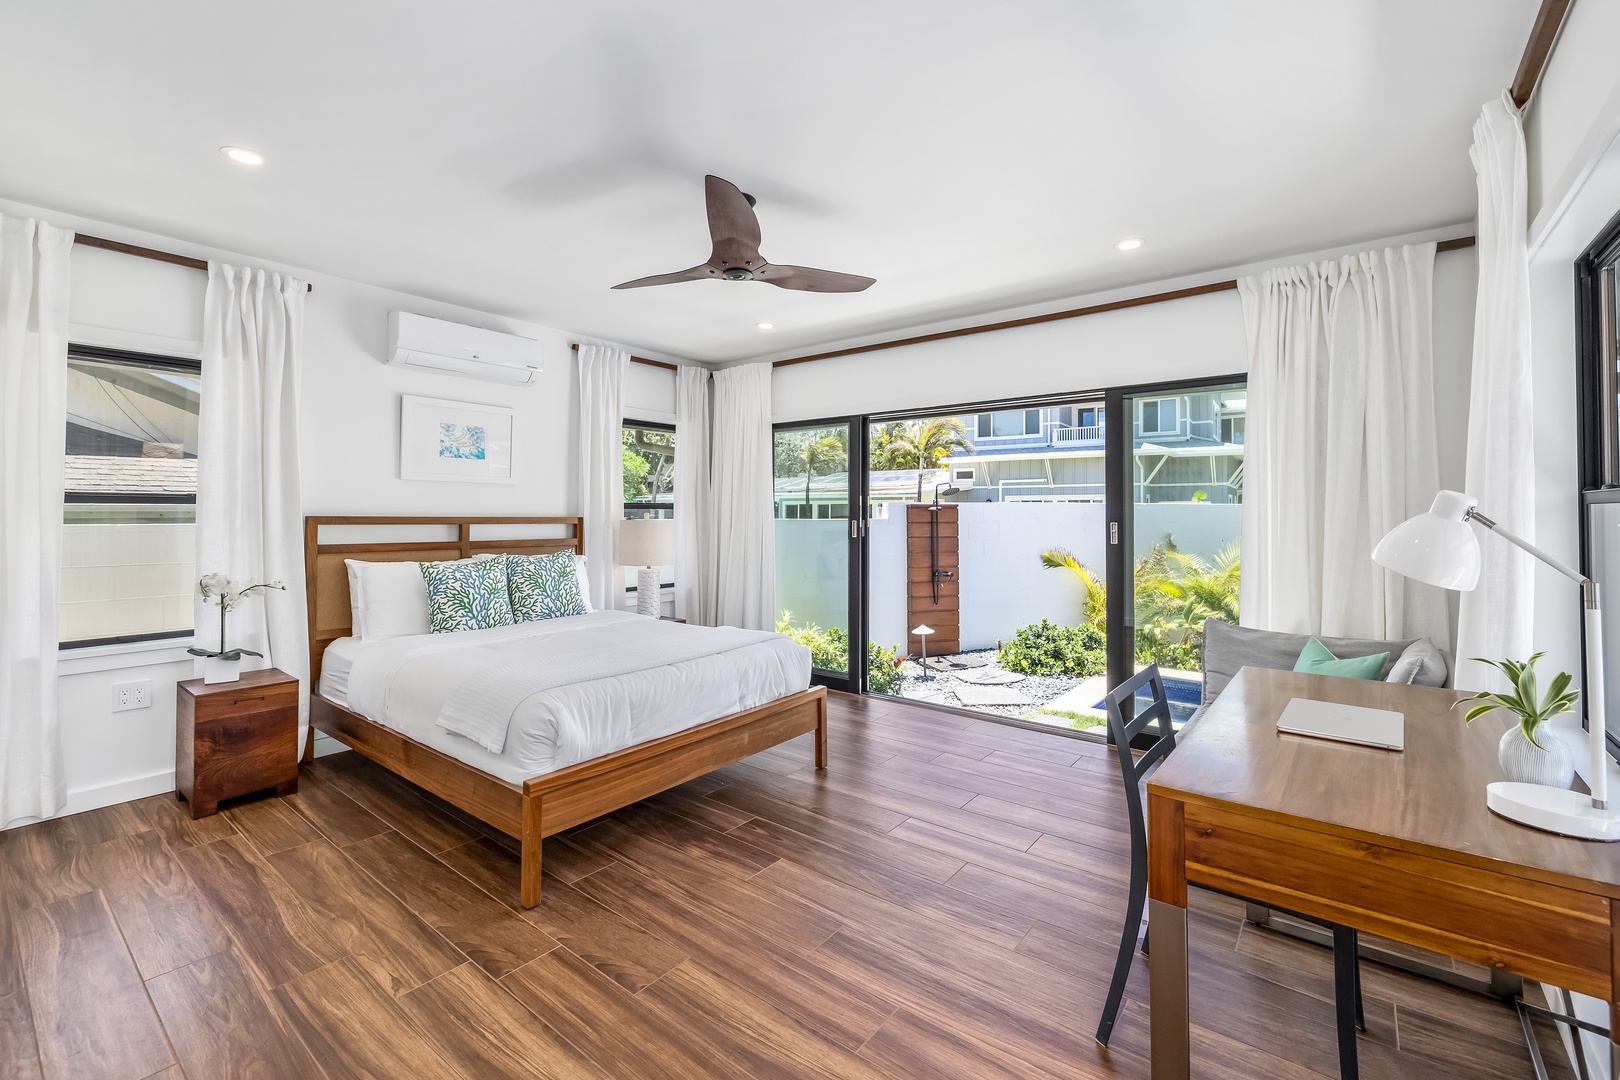 Kailua Vacation Rentals, Kailua Beach Villa - Fifth suite: Mauka South with queen bed and pool view